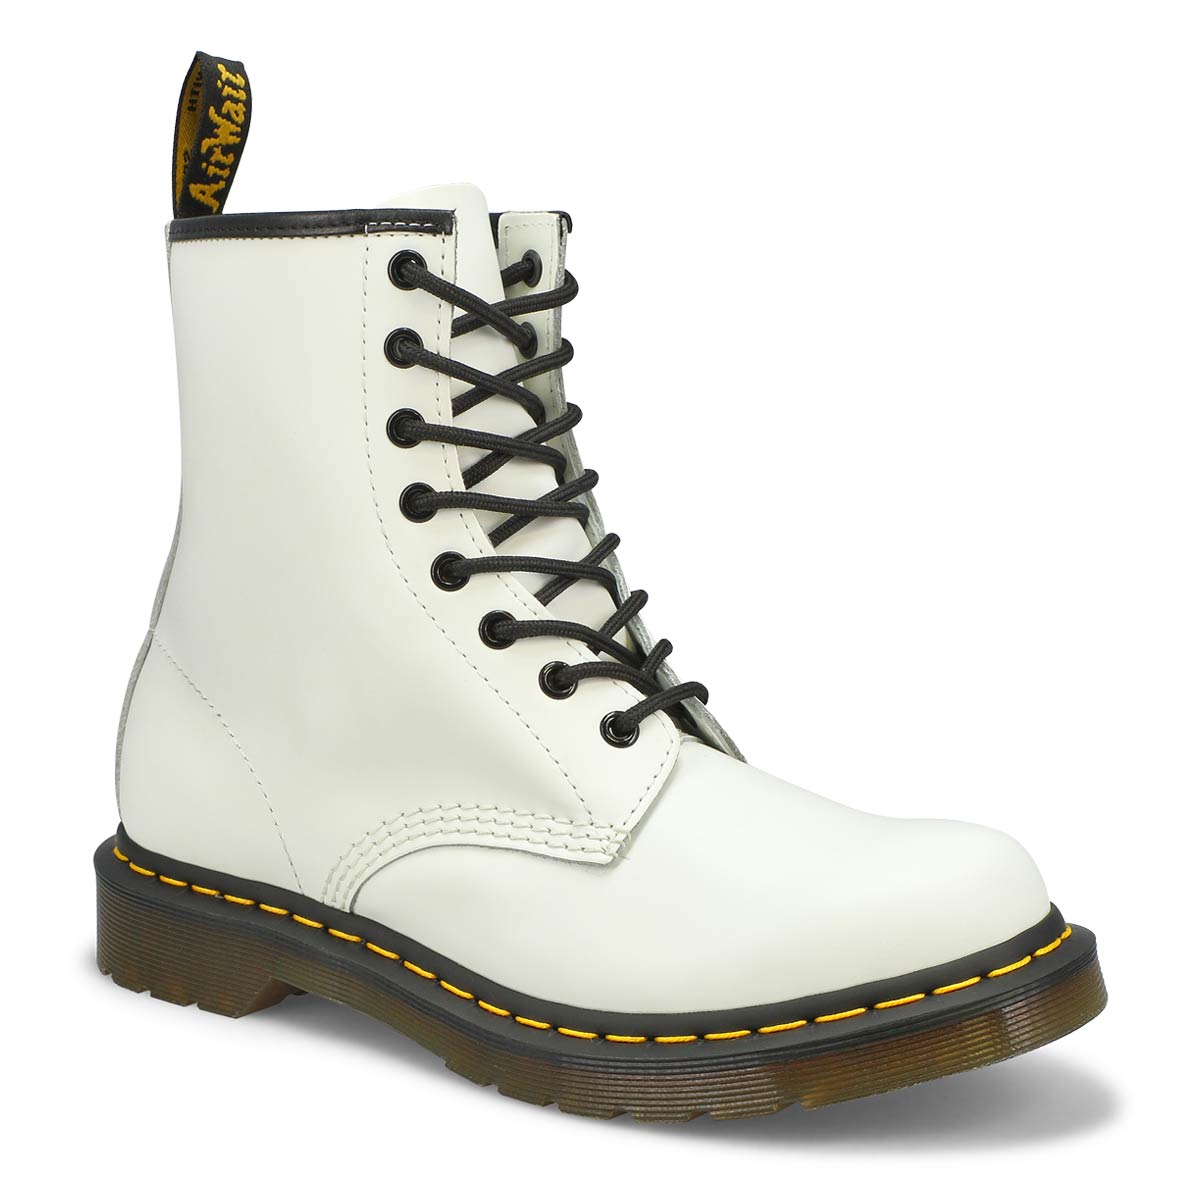 Dr Martens Women's 1460 8 Eye Smooth Leather | SoftMoc.com